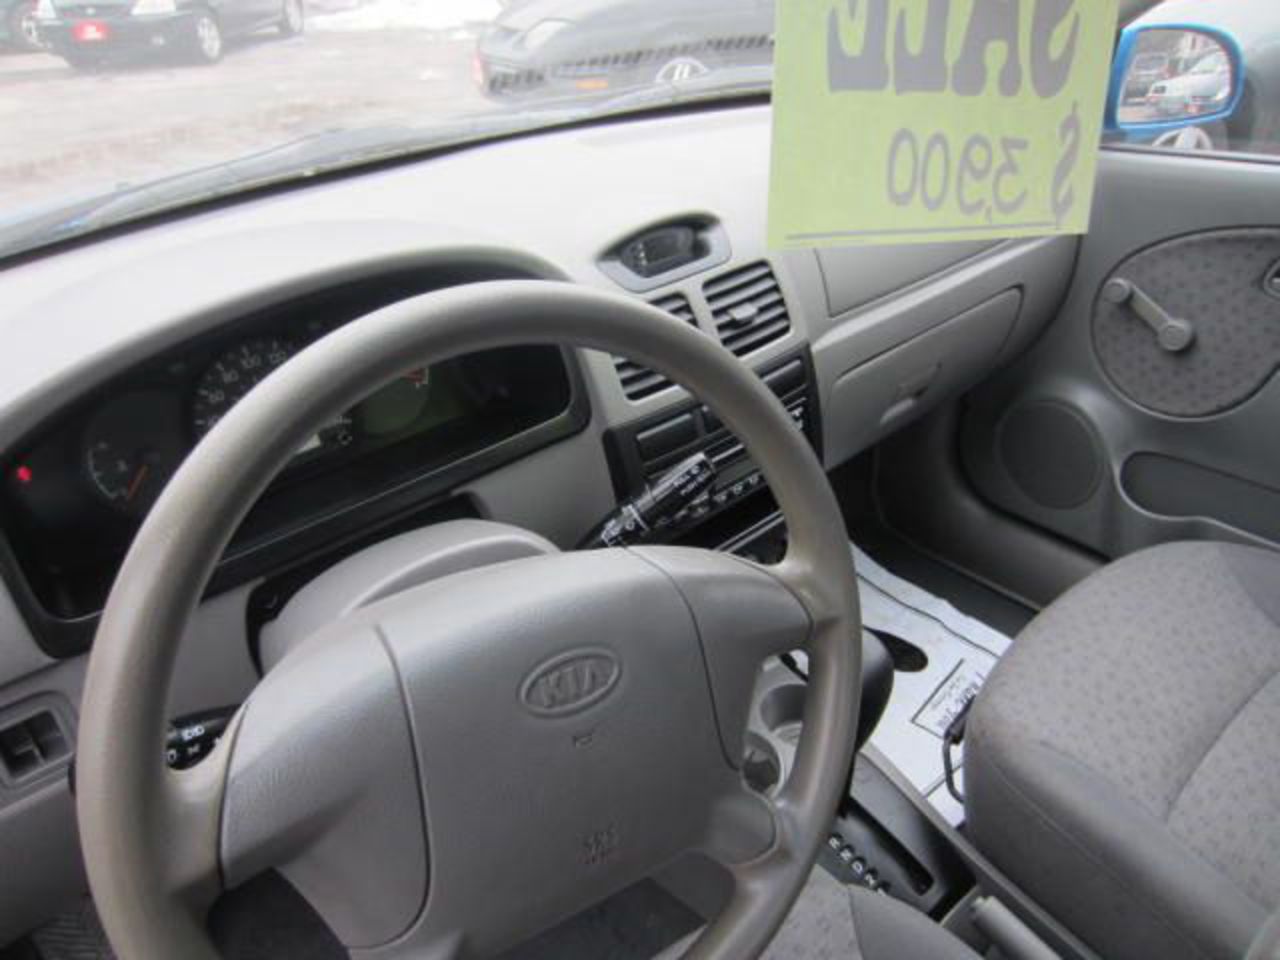 2004 Kia Rio RS w/Air Cond - Mississauga, Ontario Used Car For Sale